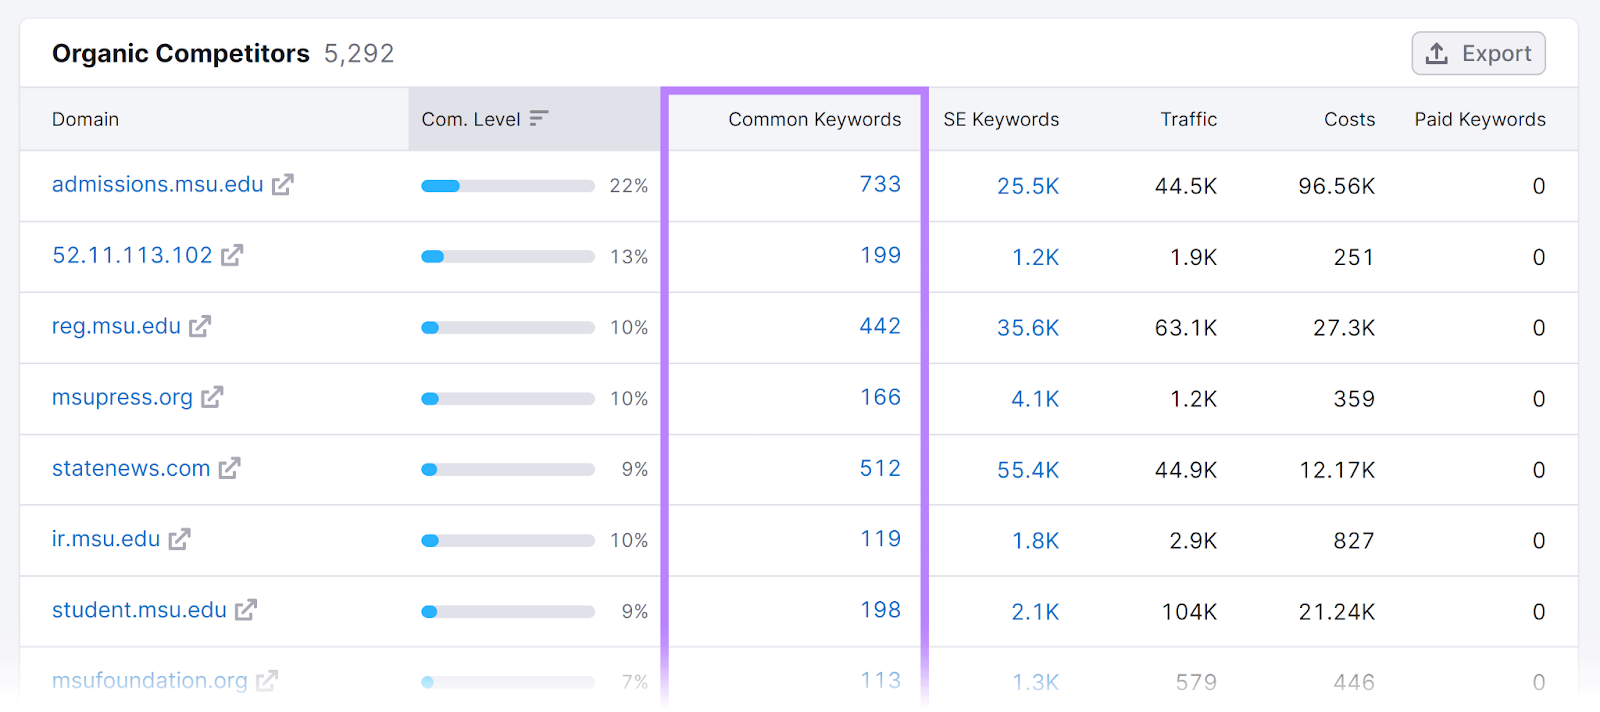 Organic Competitors report with Common Keywords column highlighted.